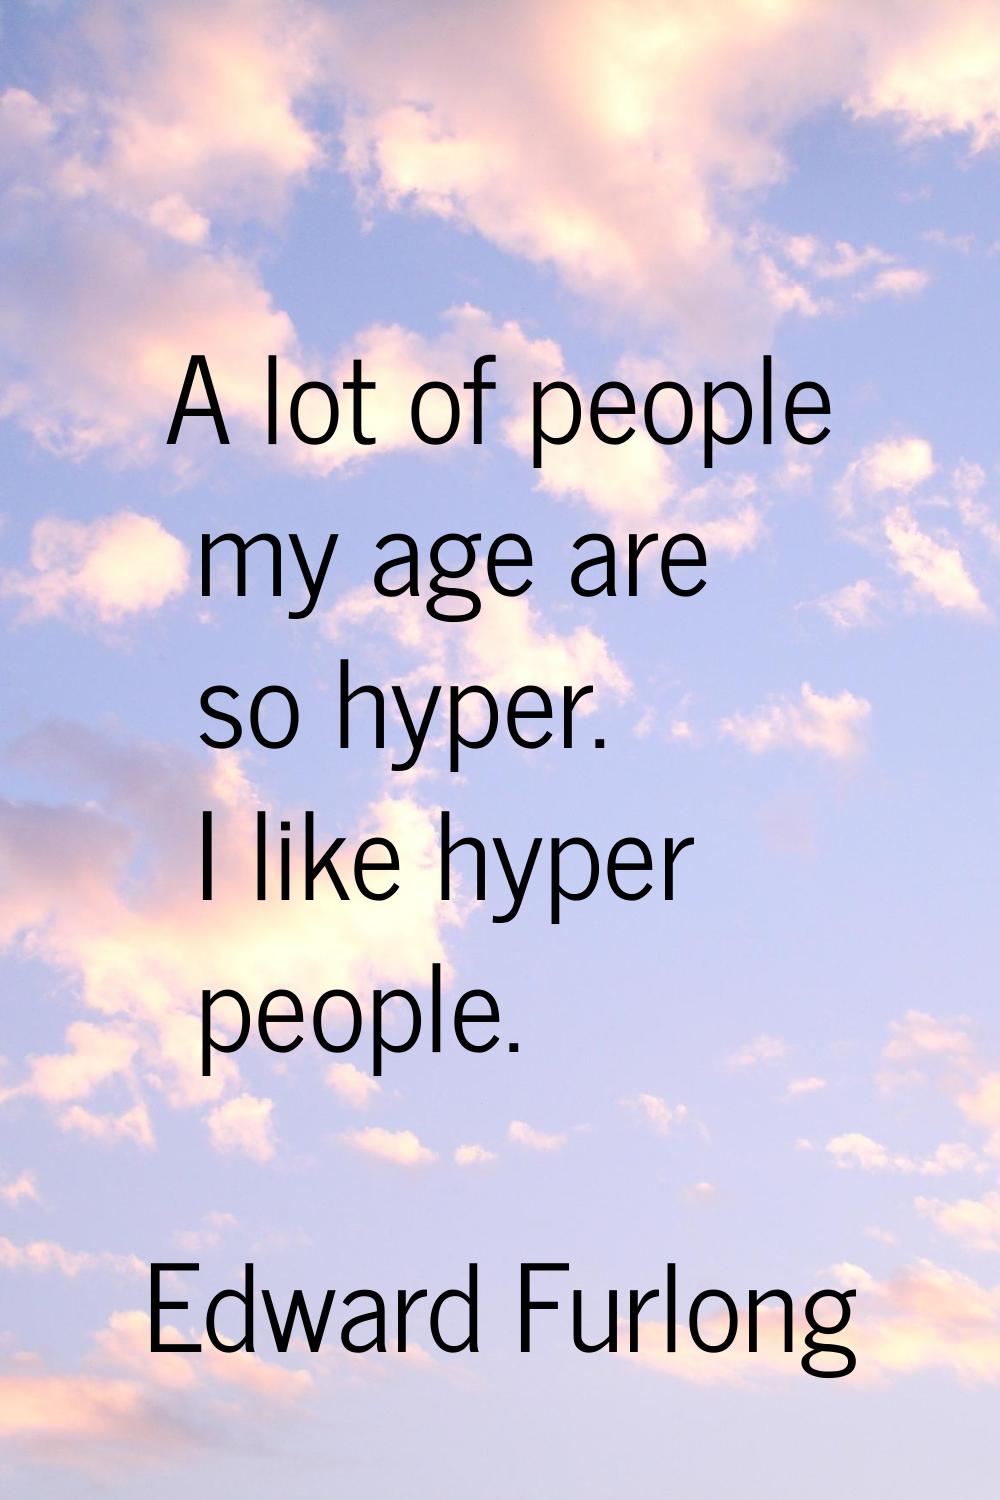 A lot of people my age are so hyper. I like hyper people.